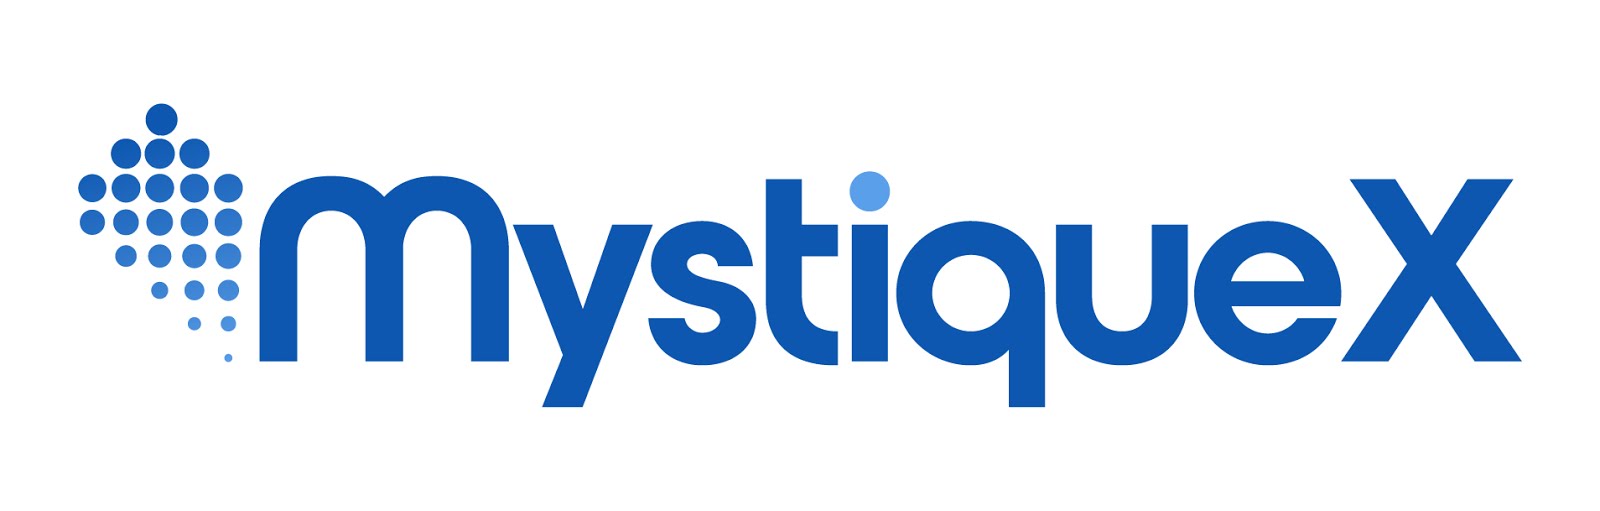 Mystique Technologies Ltd - Specialized in building cloud native products & services